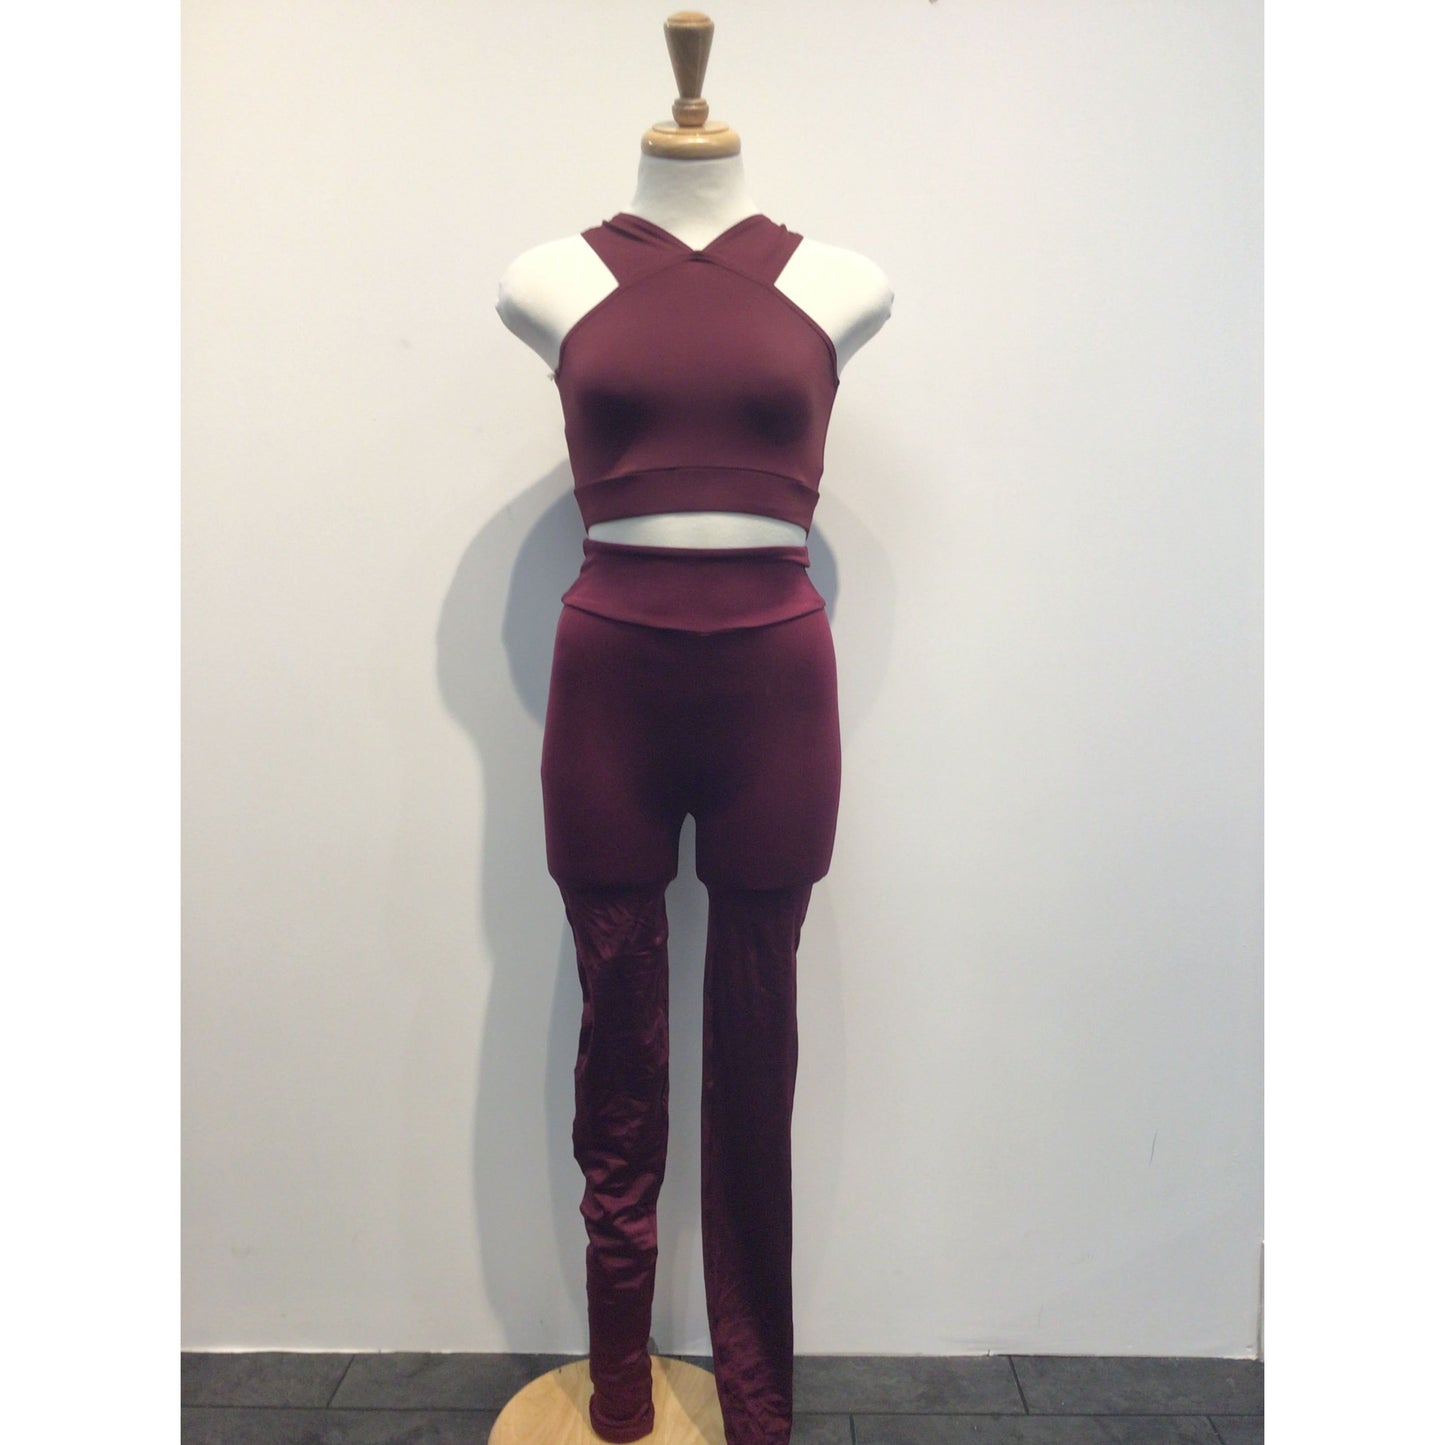 Maroon Leggings with Sports Top